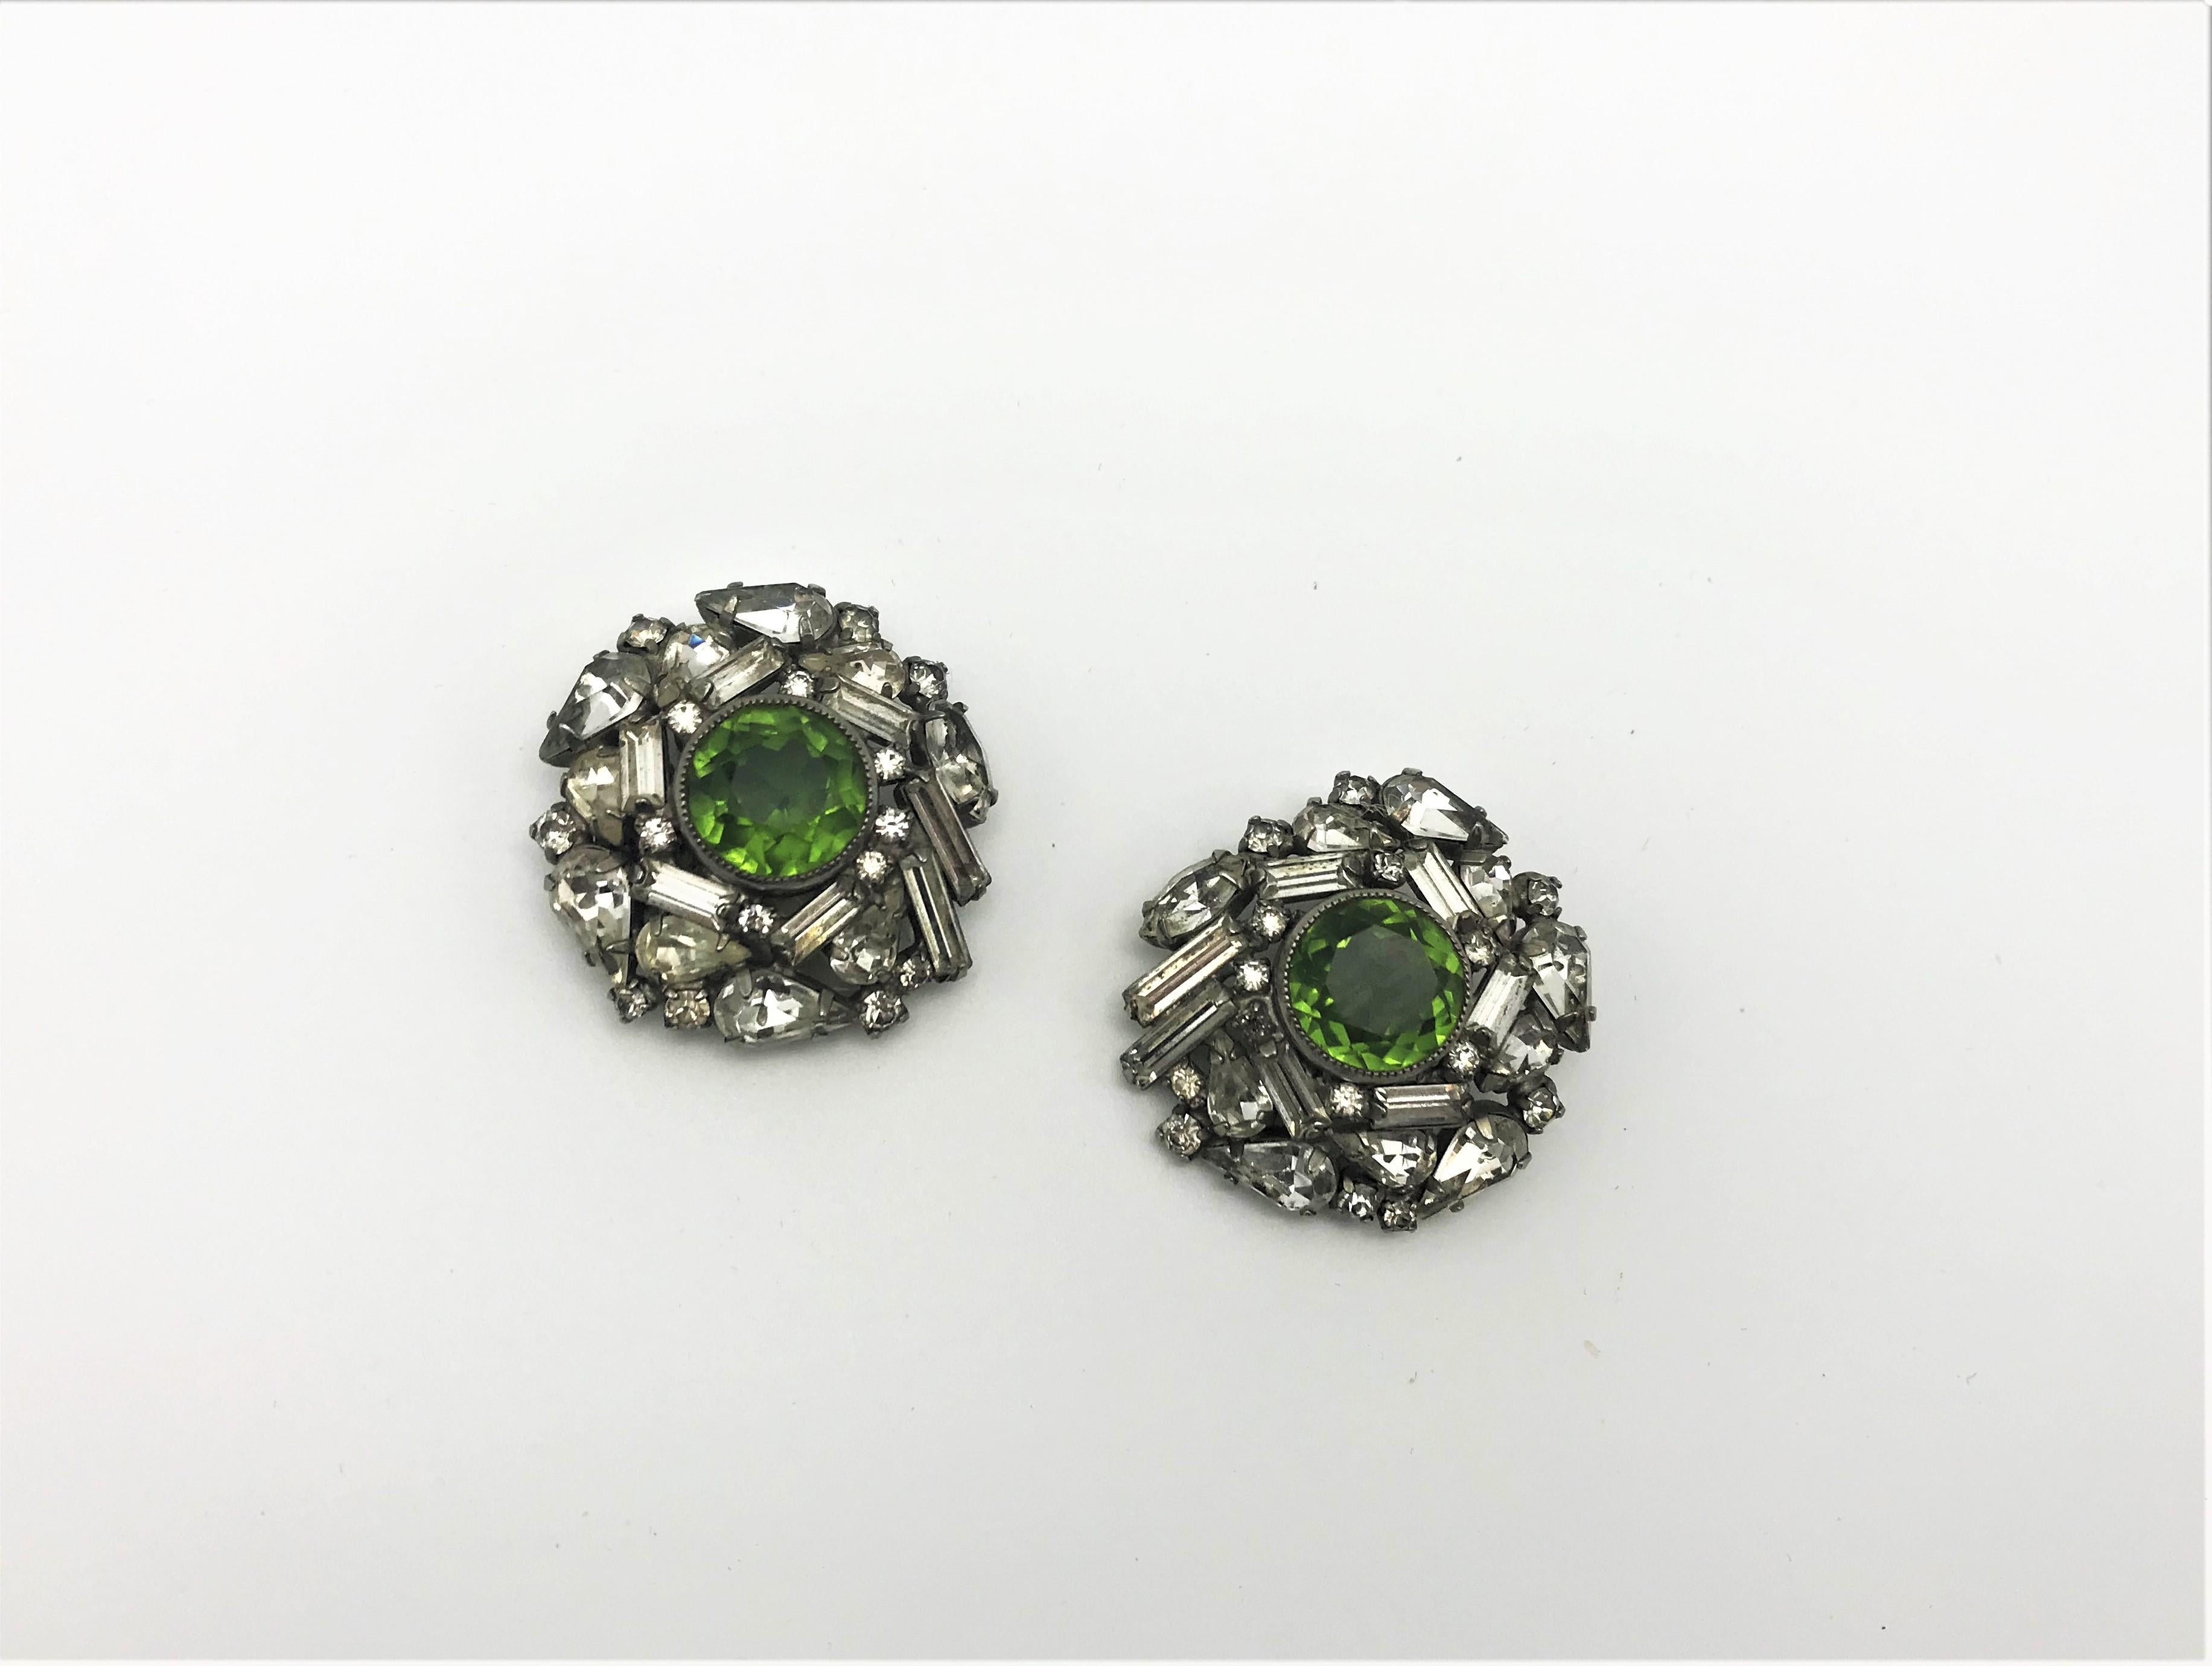 A pair of very nice and wearable ear clip with different shapes and cuts of rhinestones. In the middle there is a 1,5 cm large cut green rhinestone. He is made of silver metal and coms from the USA about 1940 years. 
Measurement: Diameter 3 cm, clip